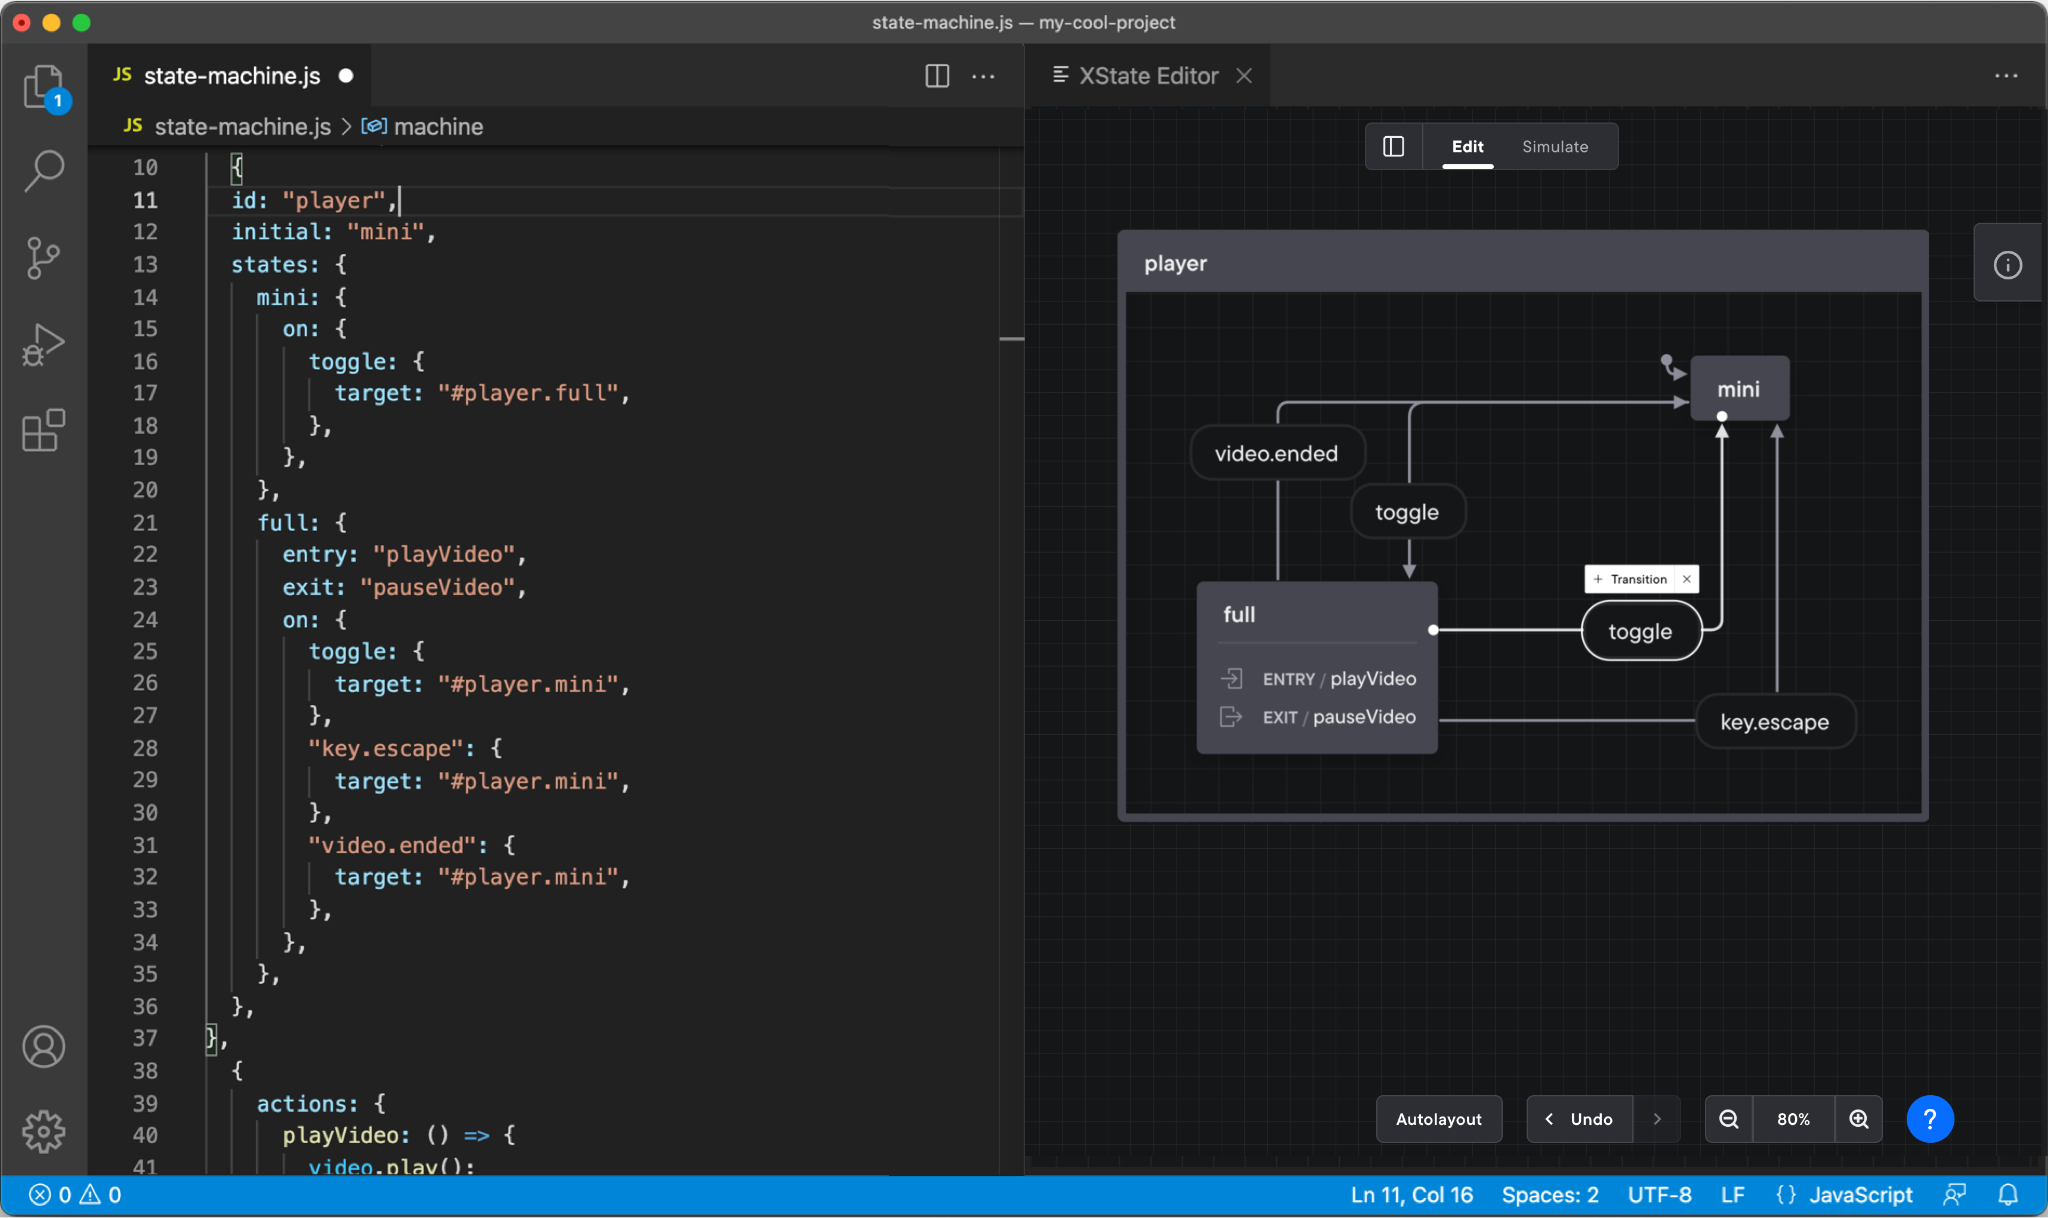 Stately VS Code extension showing a split screen inside VS Code with the code editor on the left and the Stately visual Editor on the right.